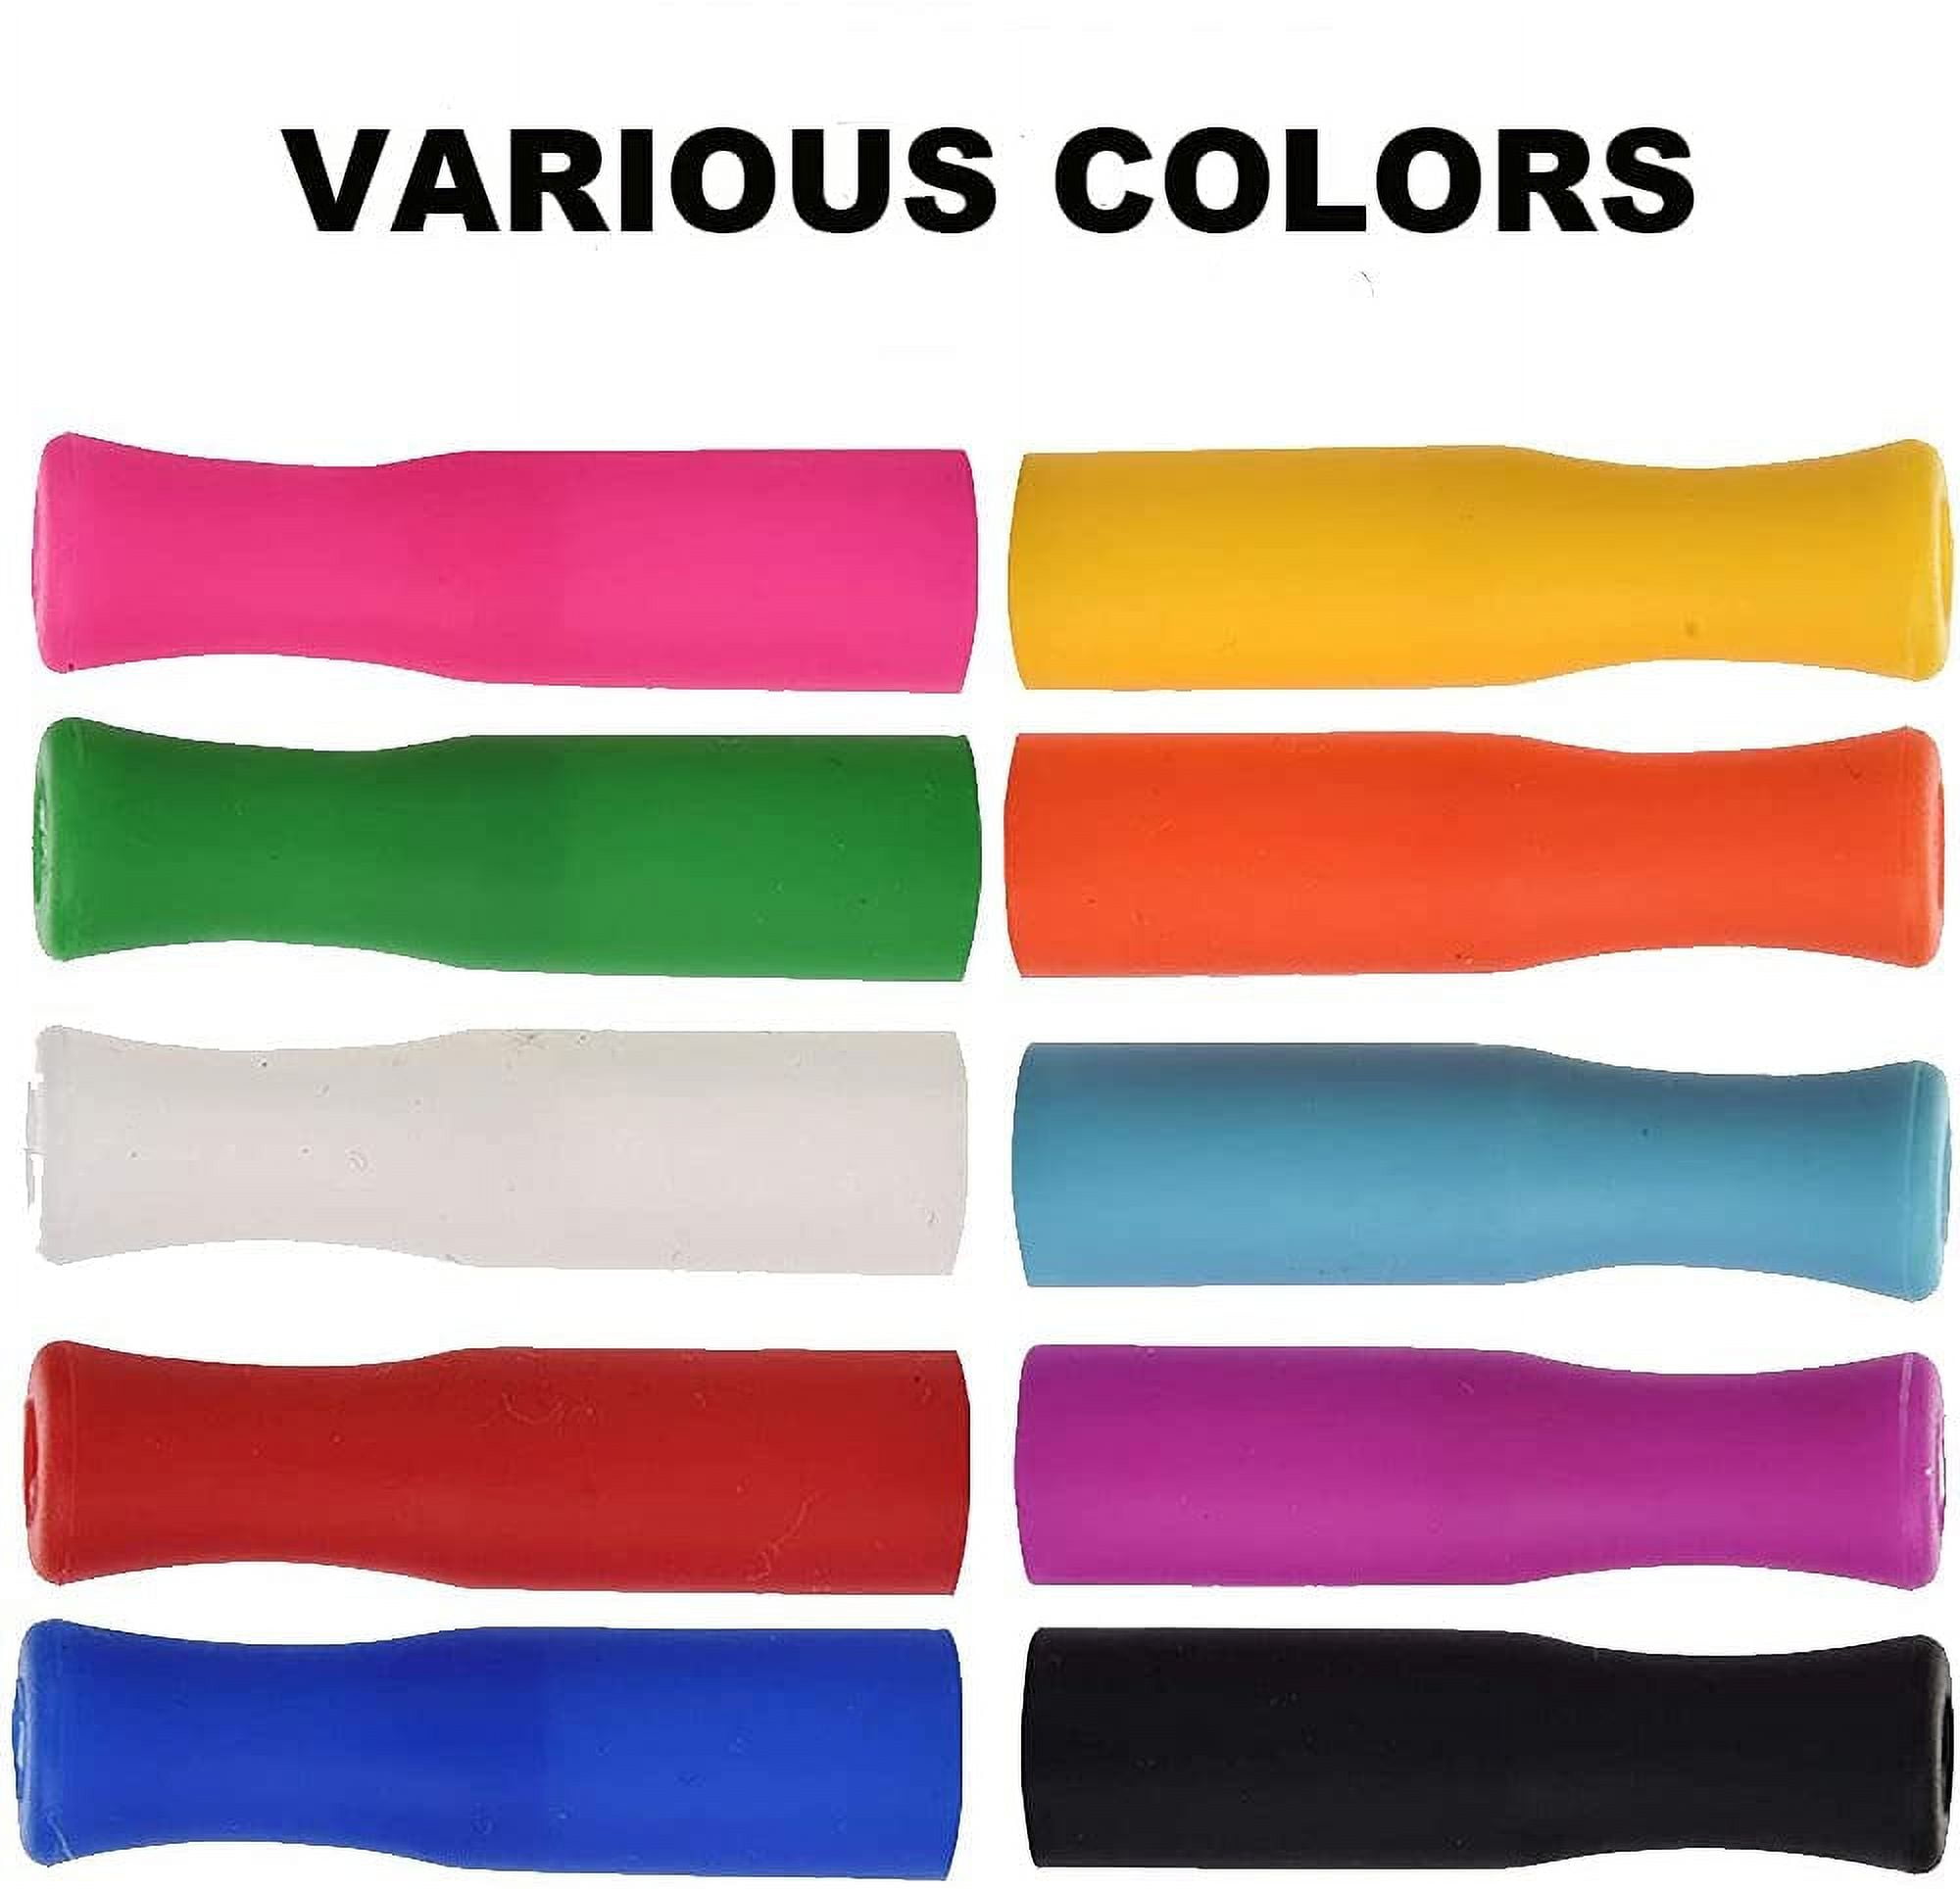 Reusable Silicone Straw Tip Covers (30 Pcs) Includes Set of Tips